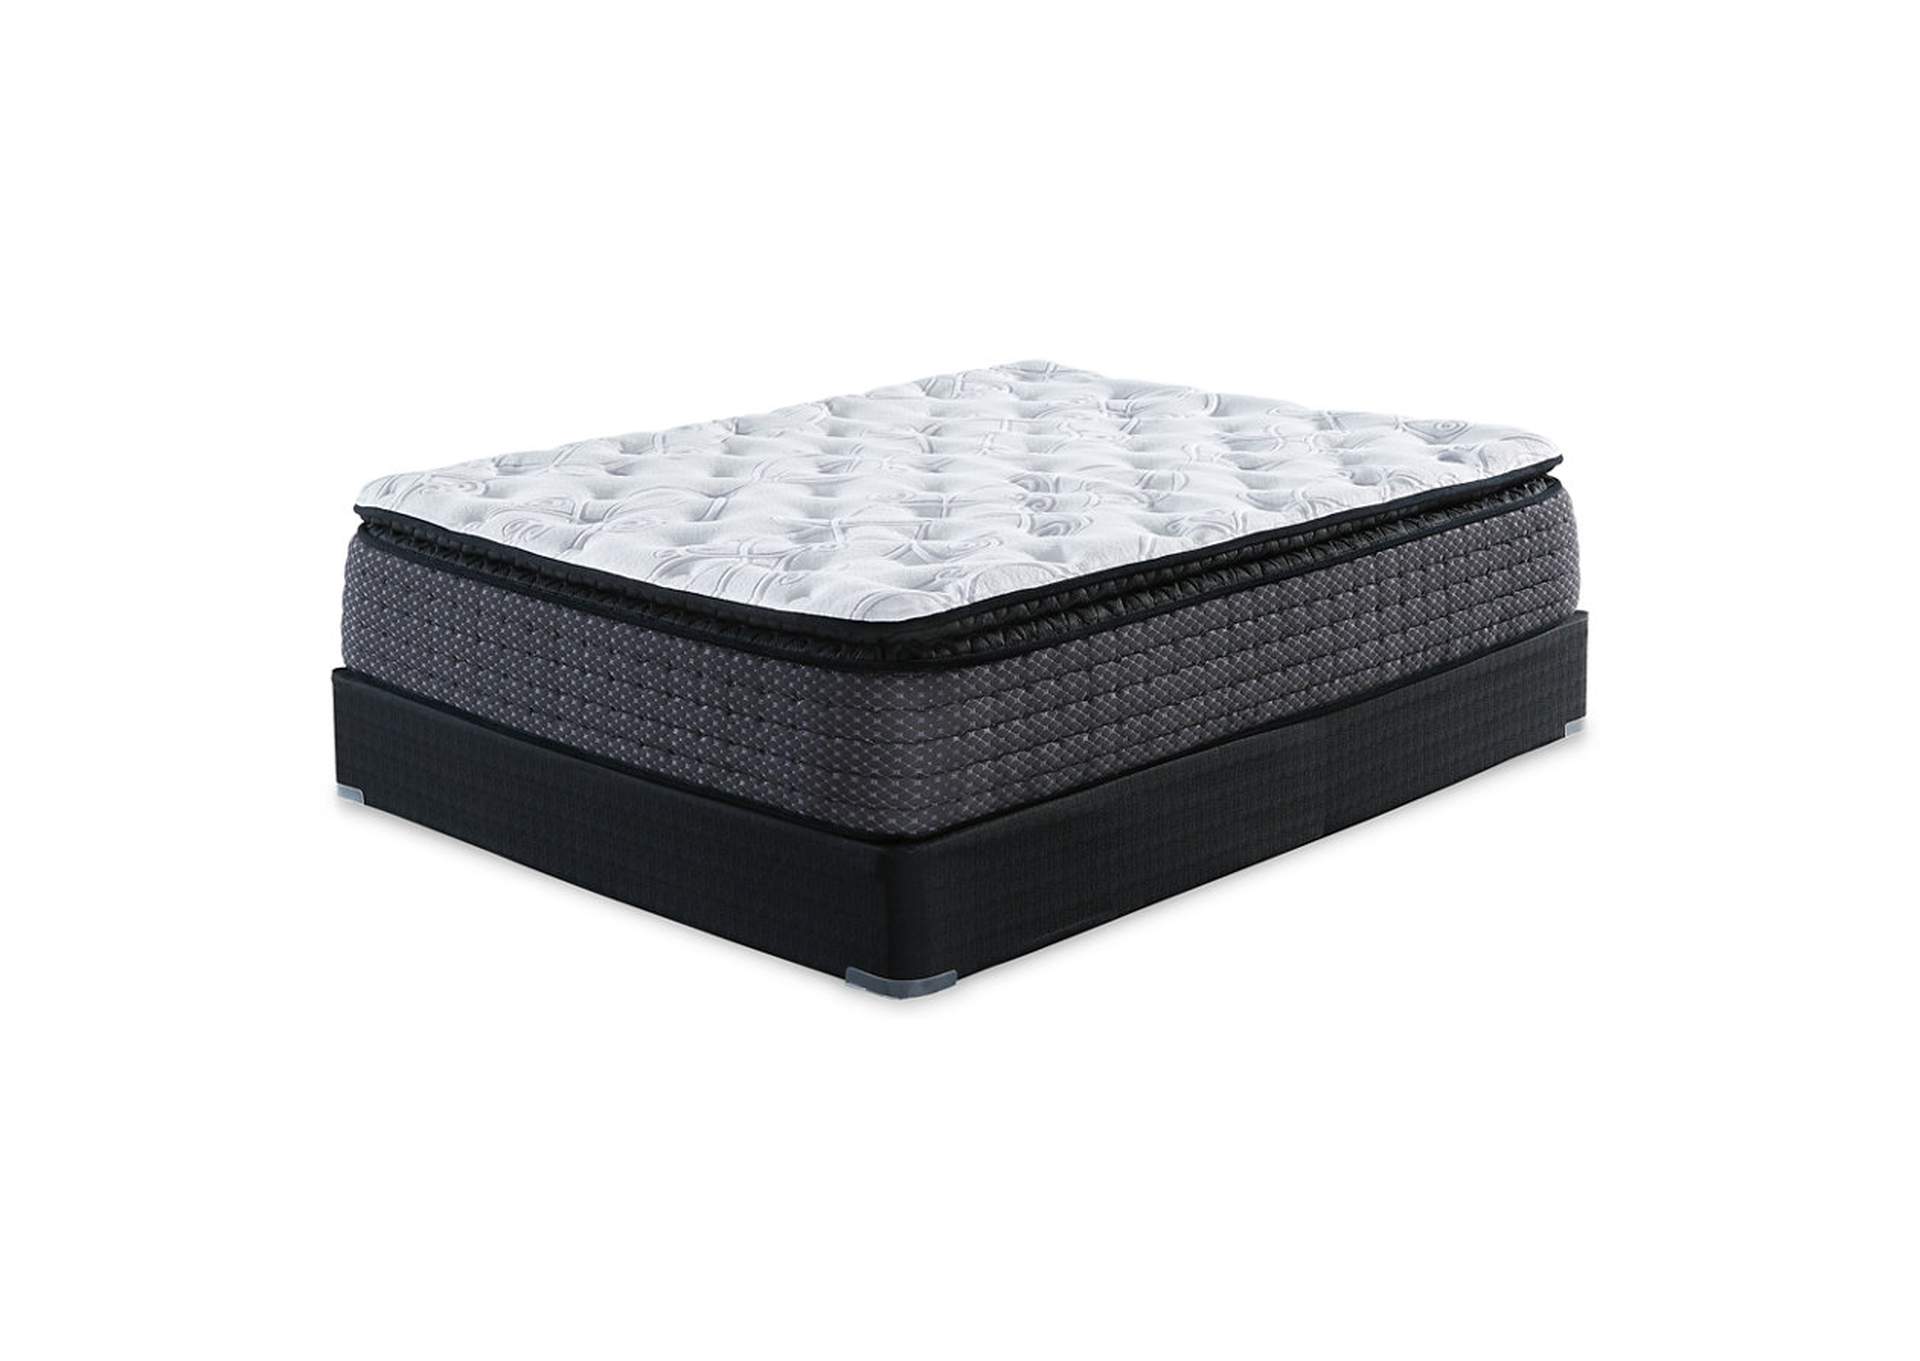 Limited Edition Pillowtop California King Mattress,Direct To Consumer Express